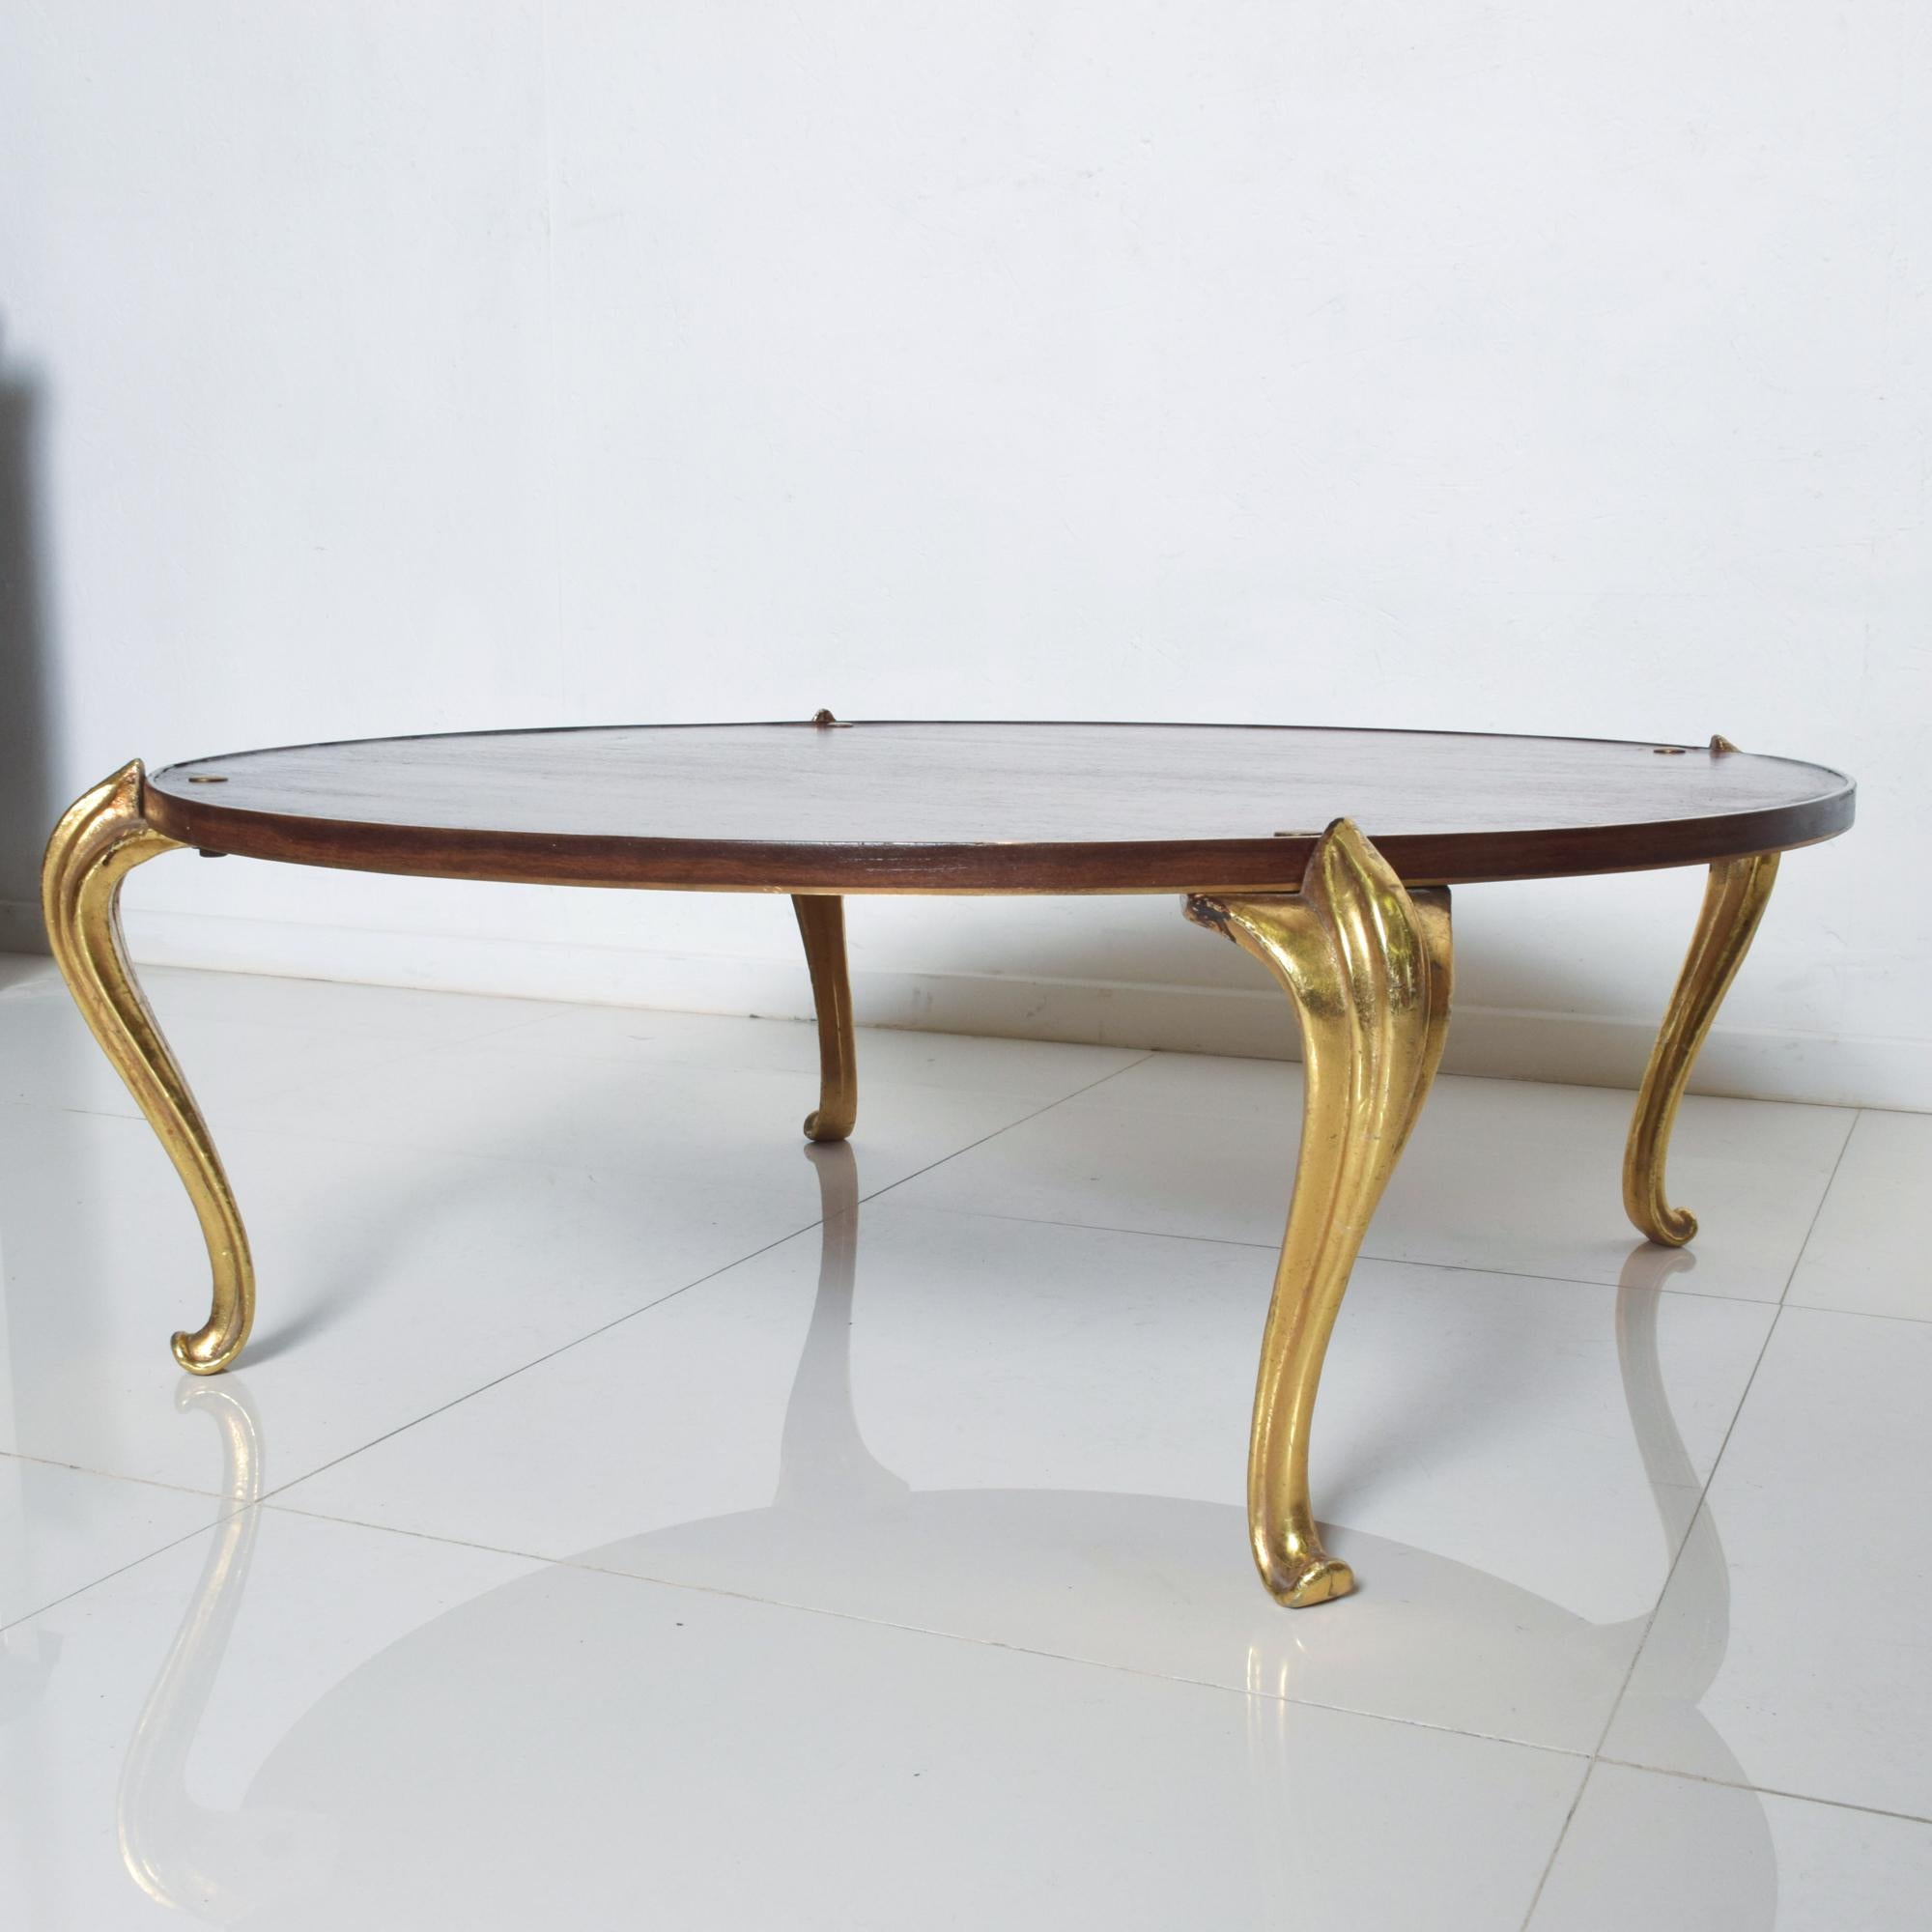 Unknown Bespoke Butterfly Inlay Round Wood Coffee Table Gold Trim Gilded Cabriole Legs For Sale